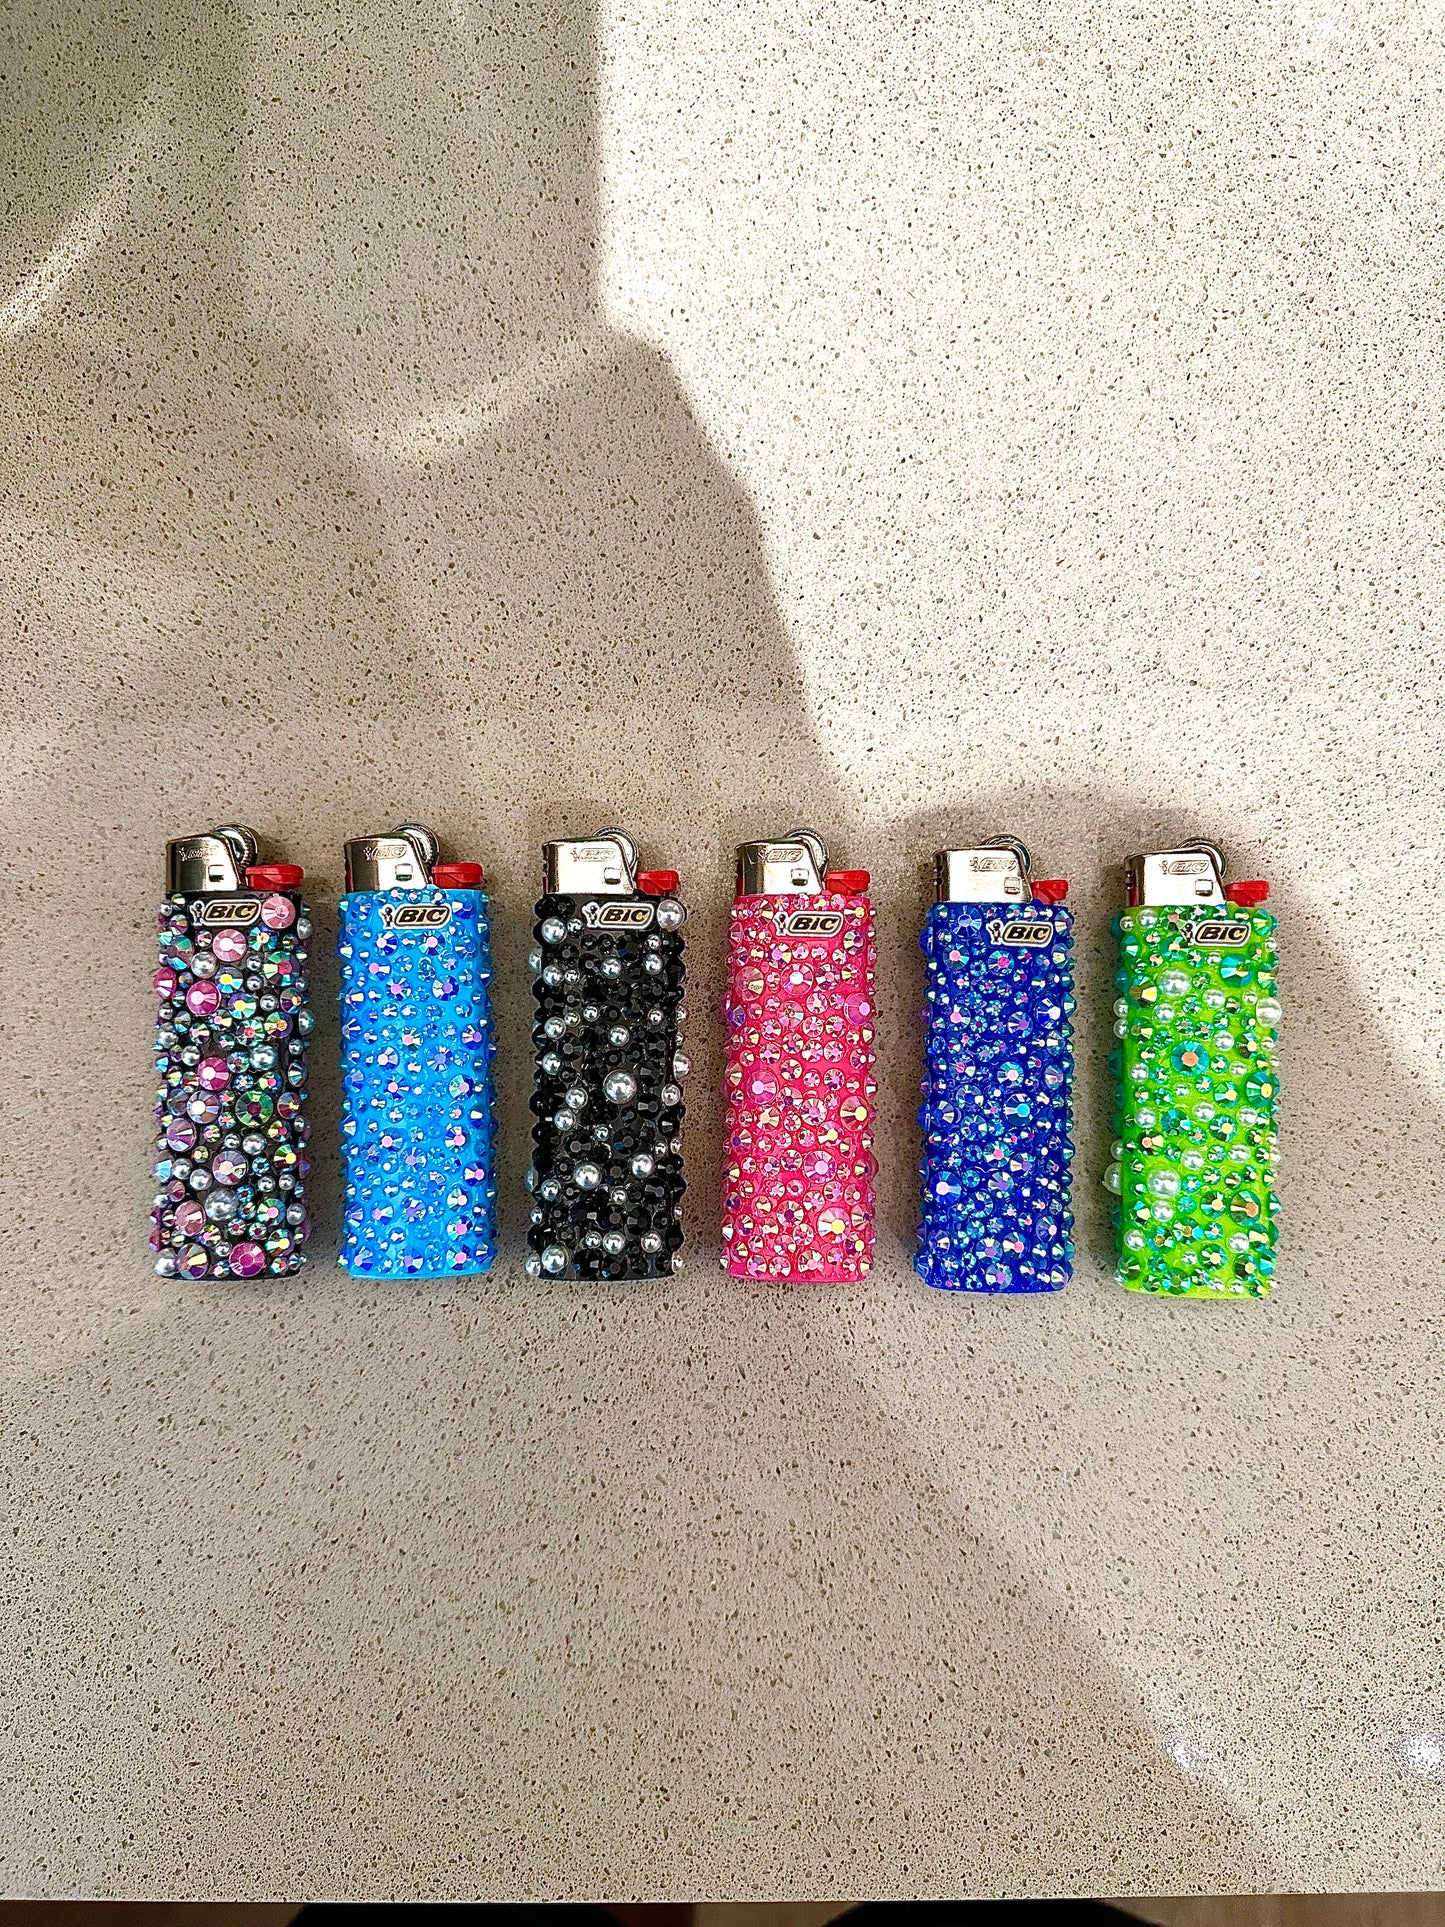 RANDOMLY selected bedazzled lighter